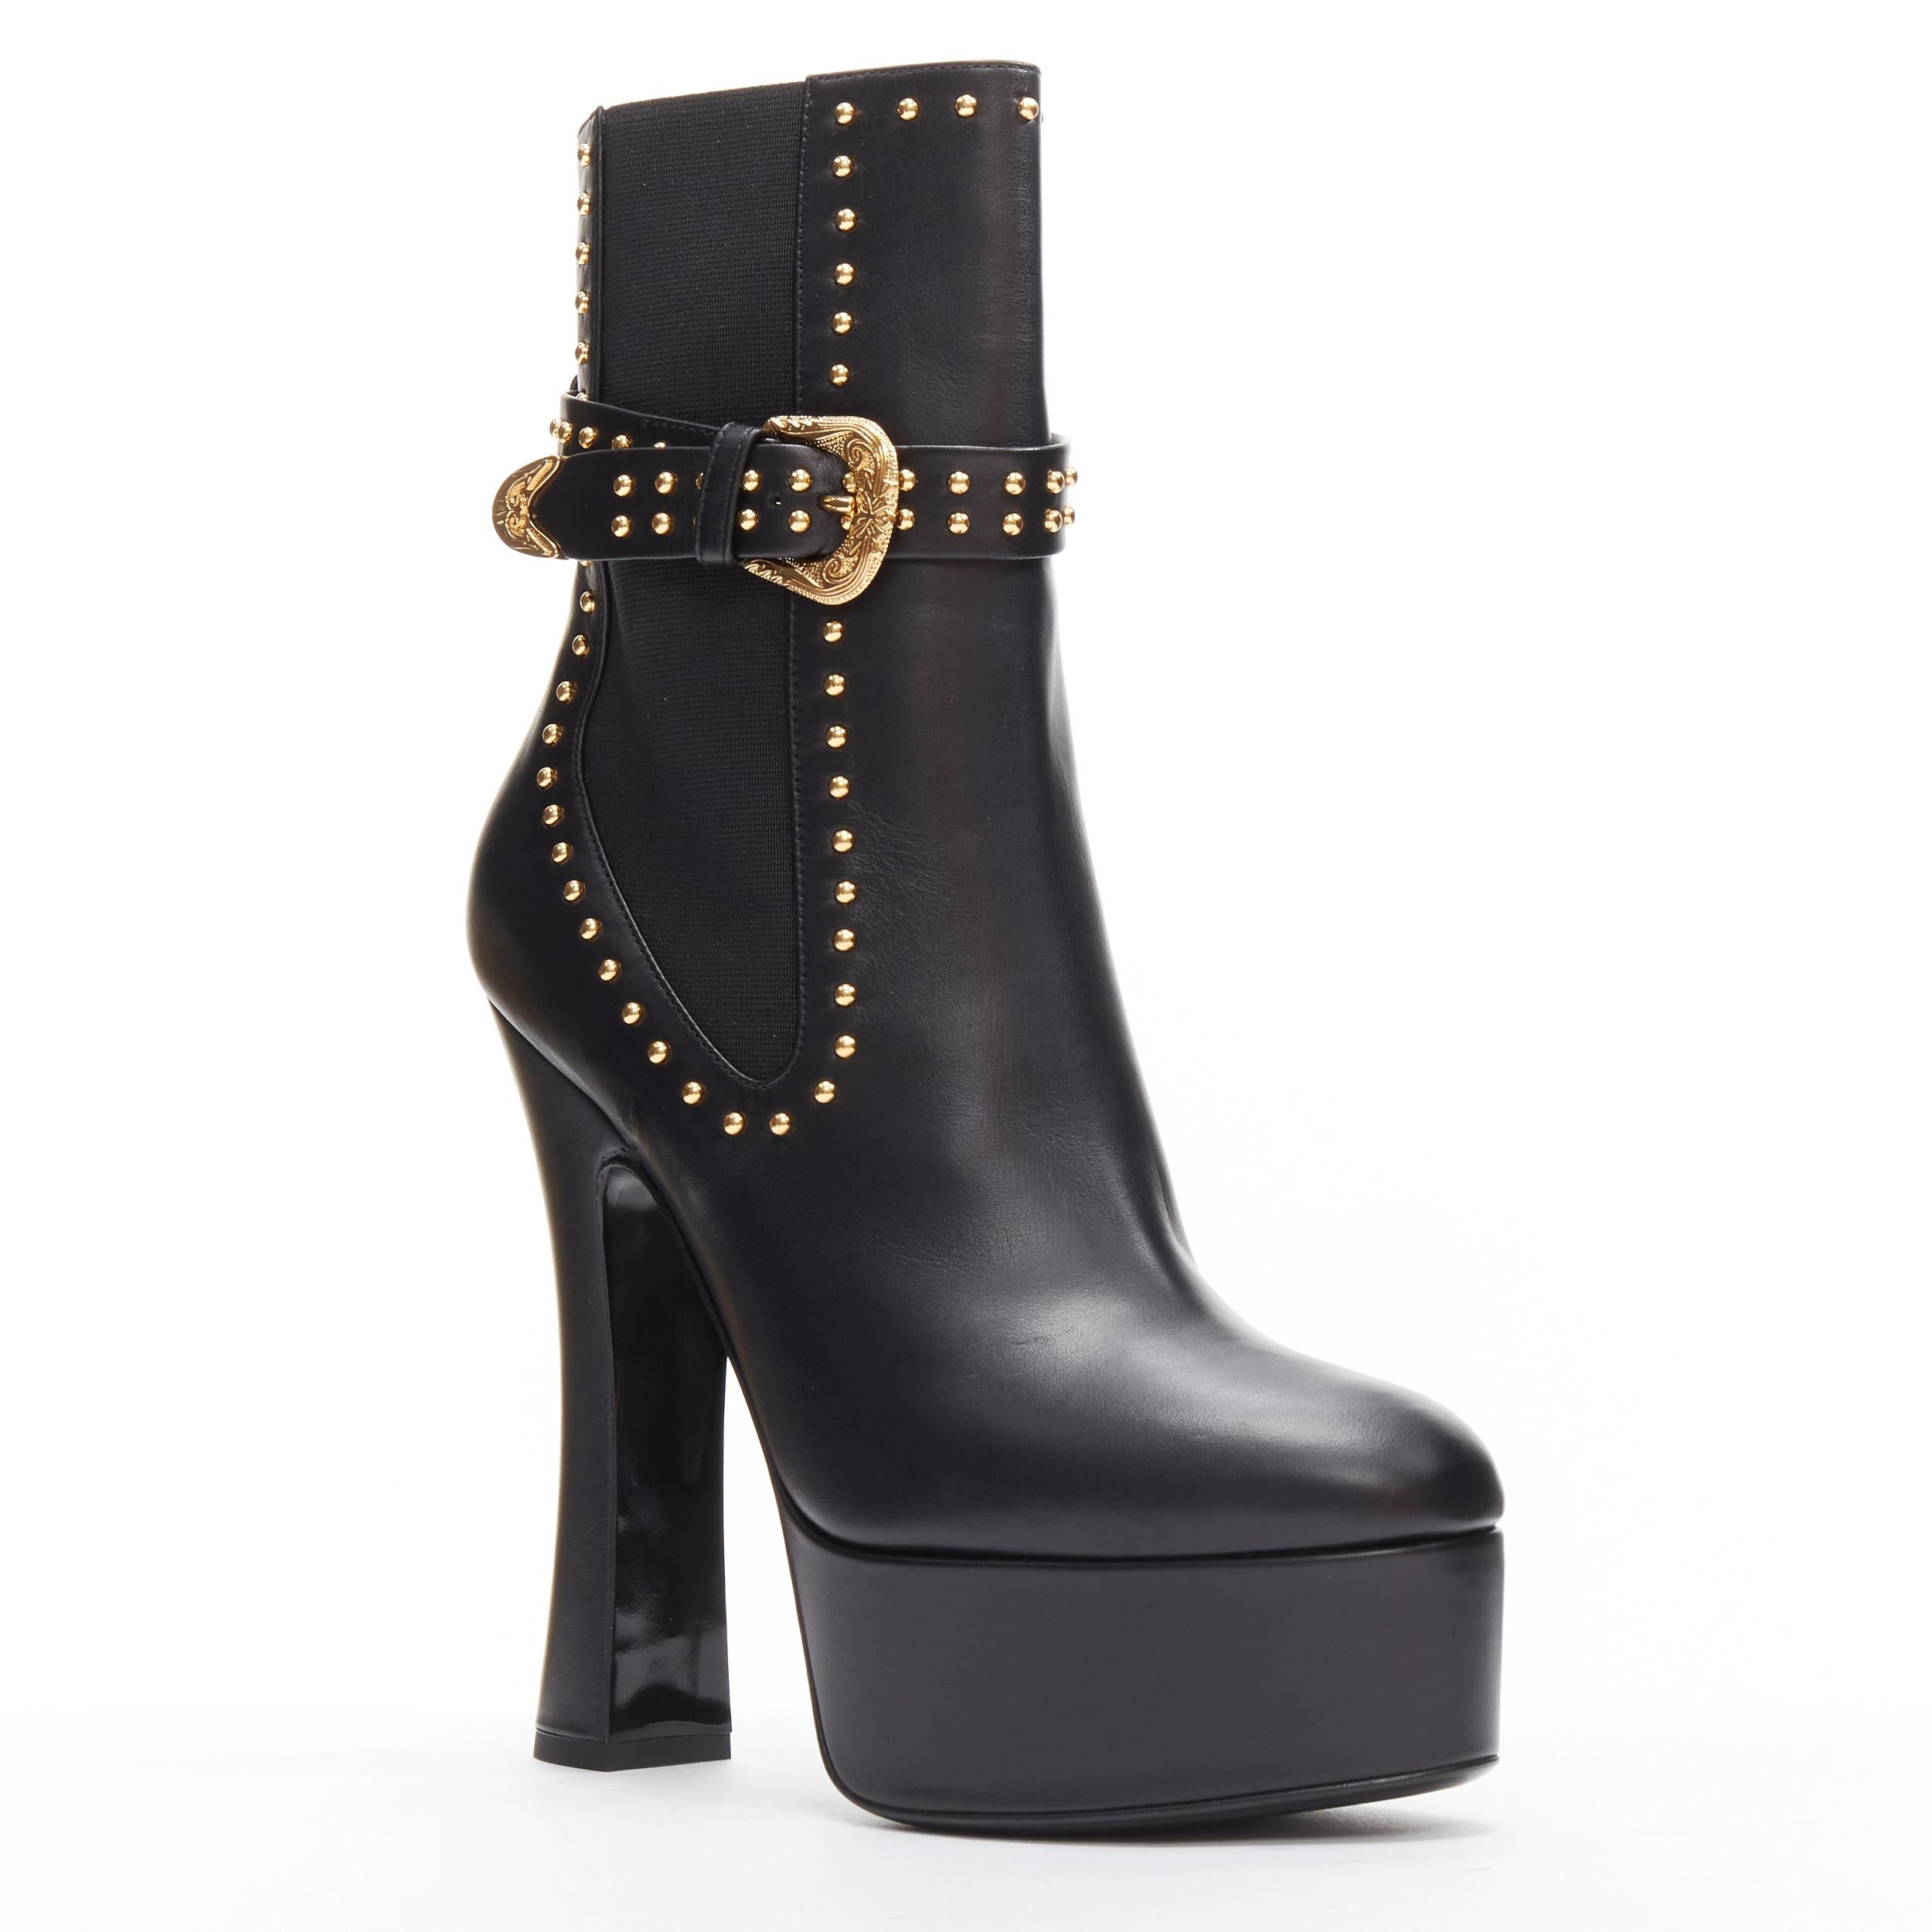 new VERSACE gold studded western buckle black leather platform boots EU38.5

Reference: TGAS/C01794

Brand: Versace

Designer: Donatella Versace

Model: DST203T DVT4X D41OH

Material: Leather

Color: Black

Pattern: Solid

Estimated Retail Price: